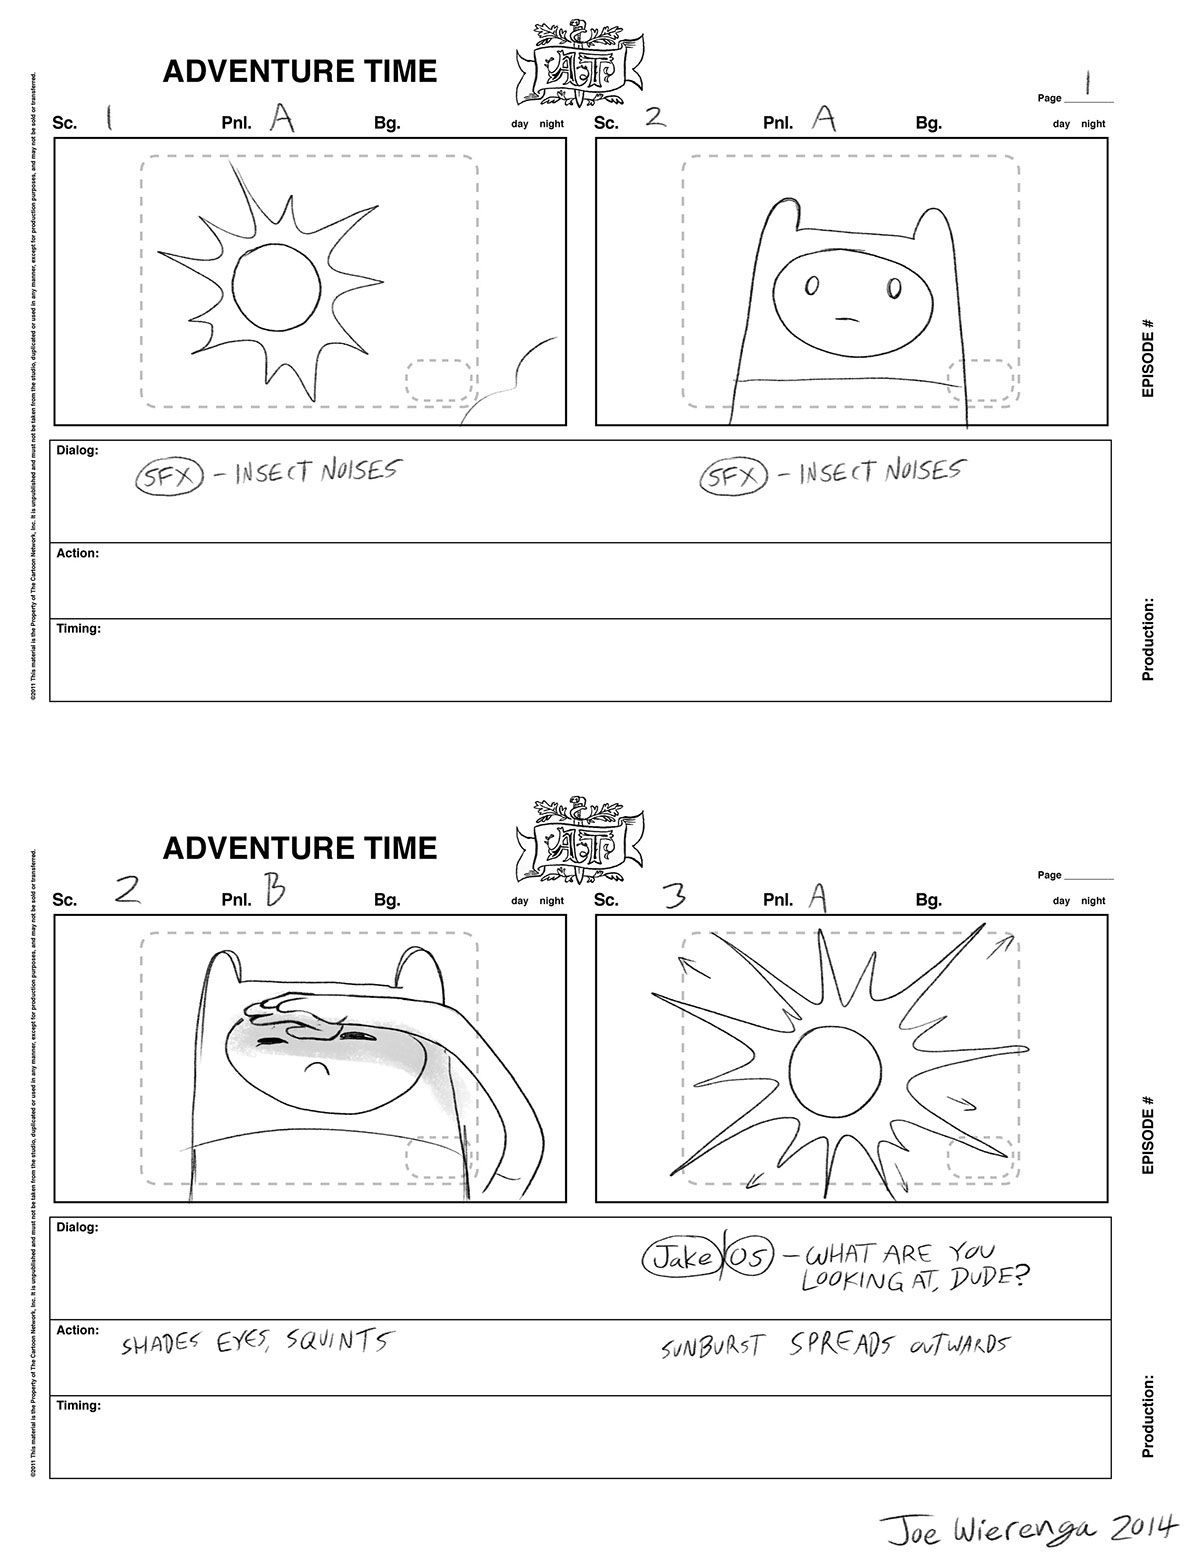 Adventure Time Storyboard Test on Behance